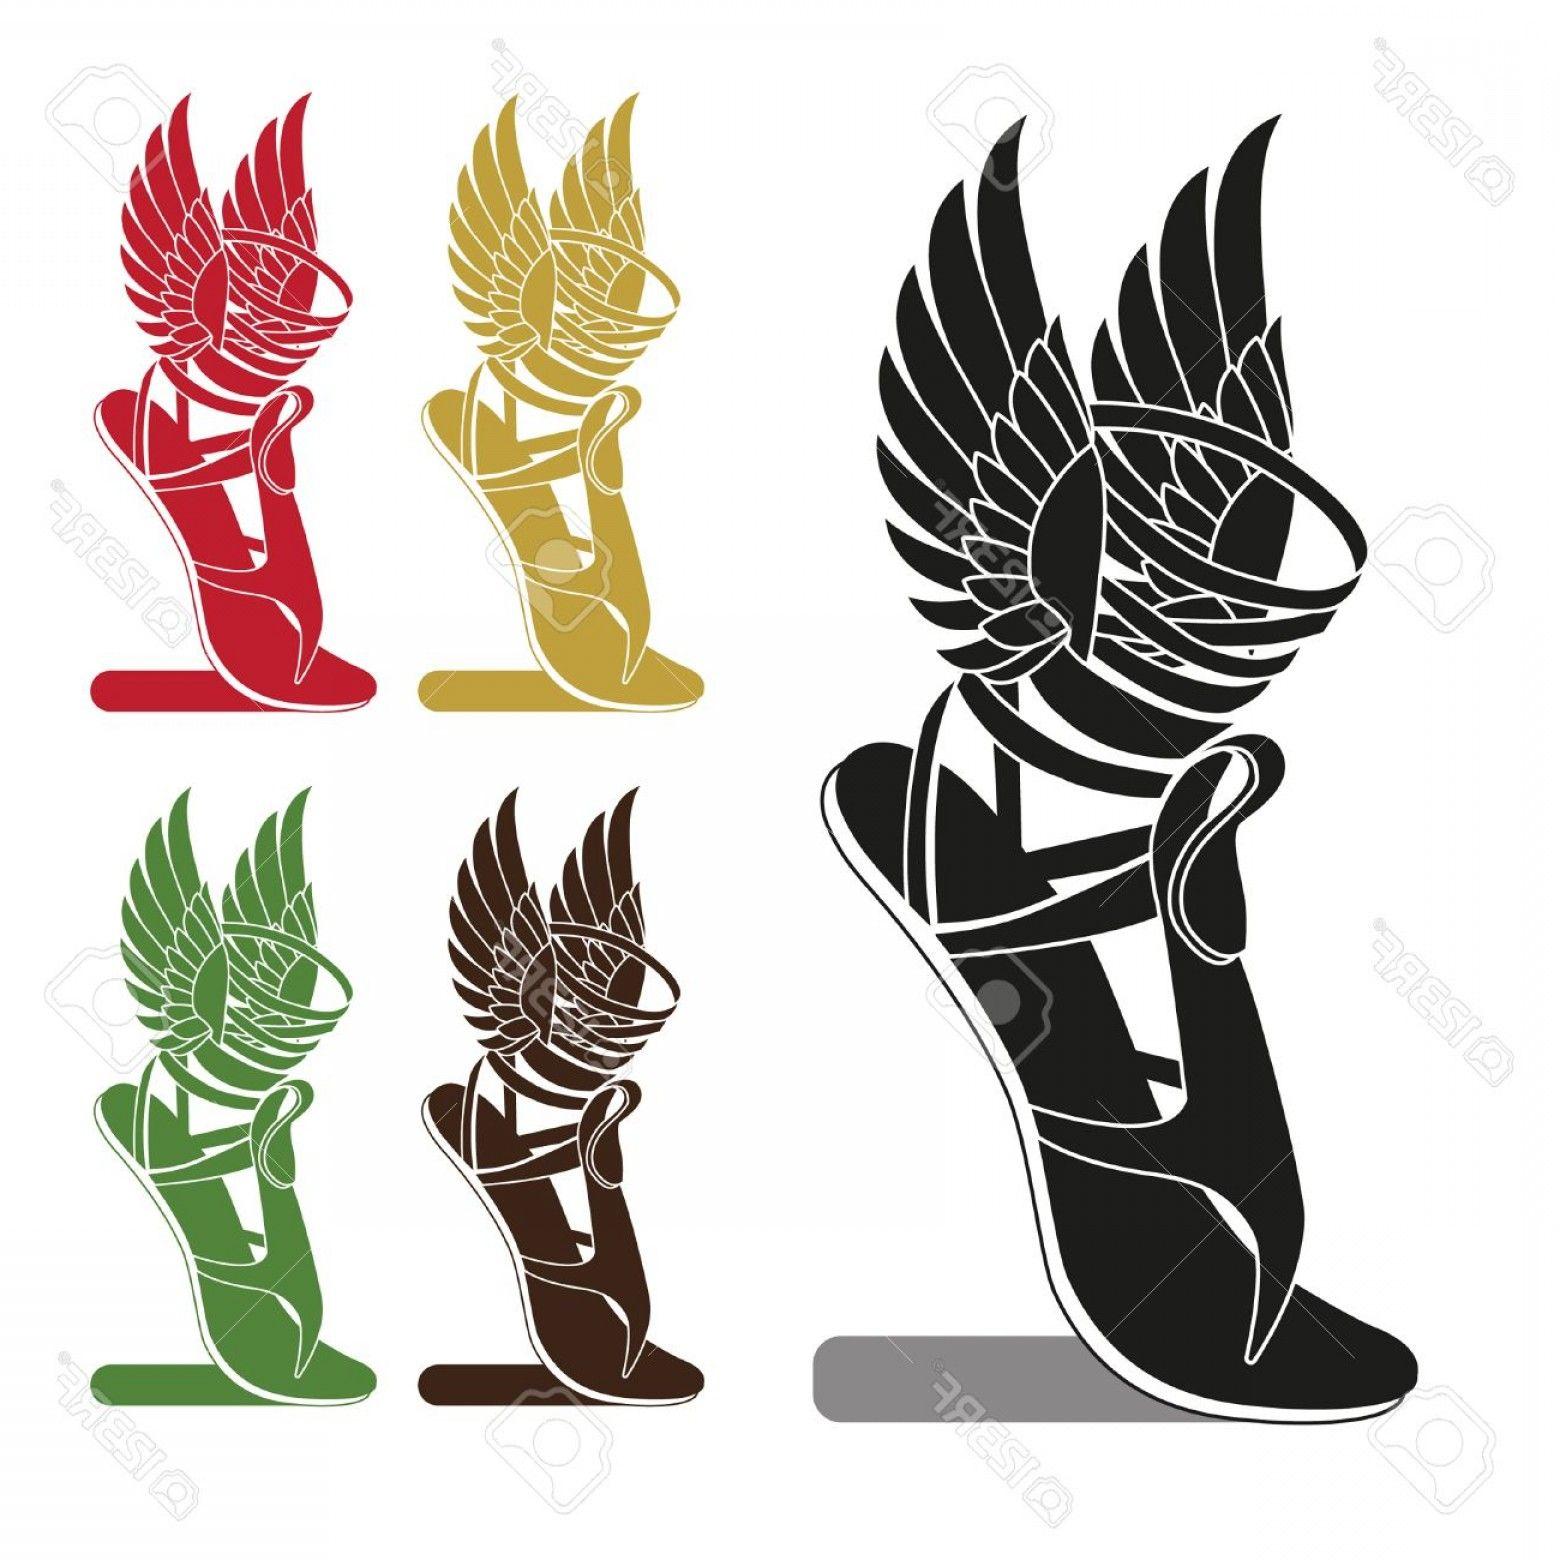 Running Shoe with Wings Logo - Catchy Photostock Vector Silhouette Running Shoe With Wings Symbol ...